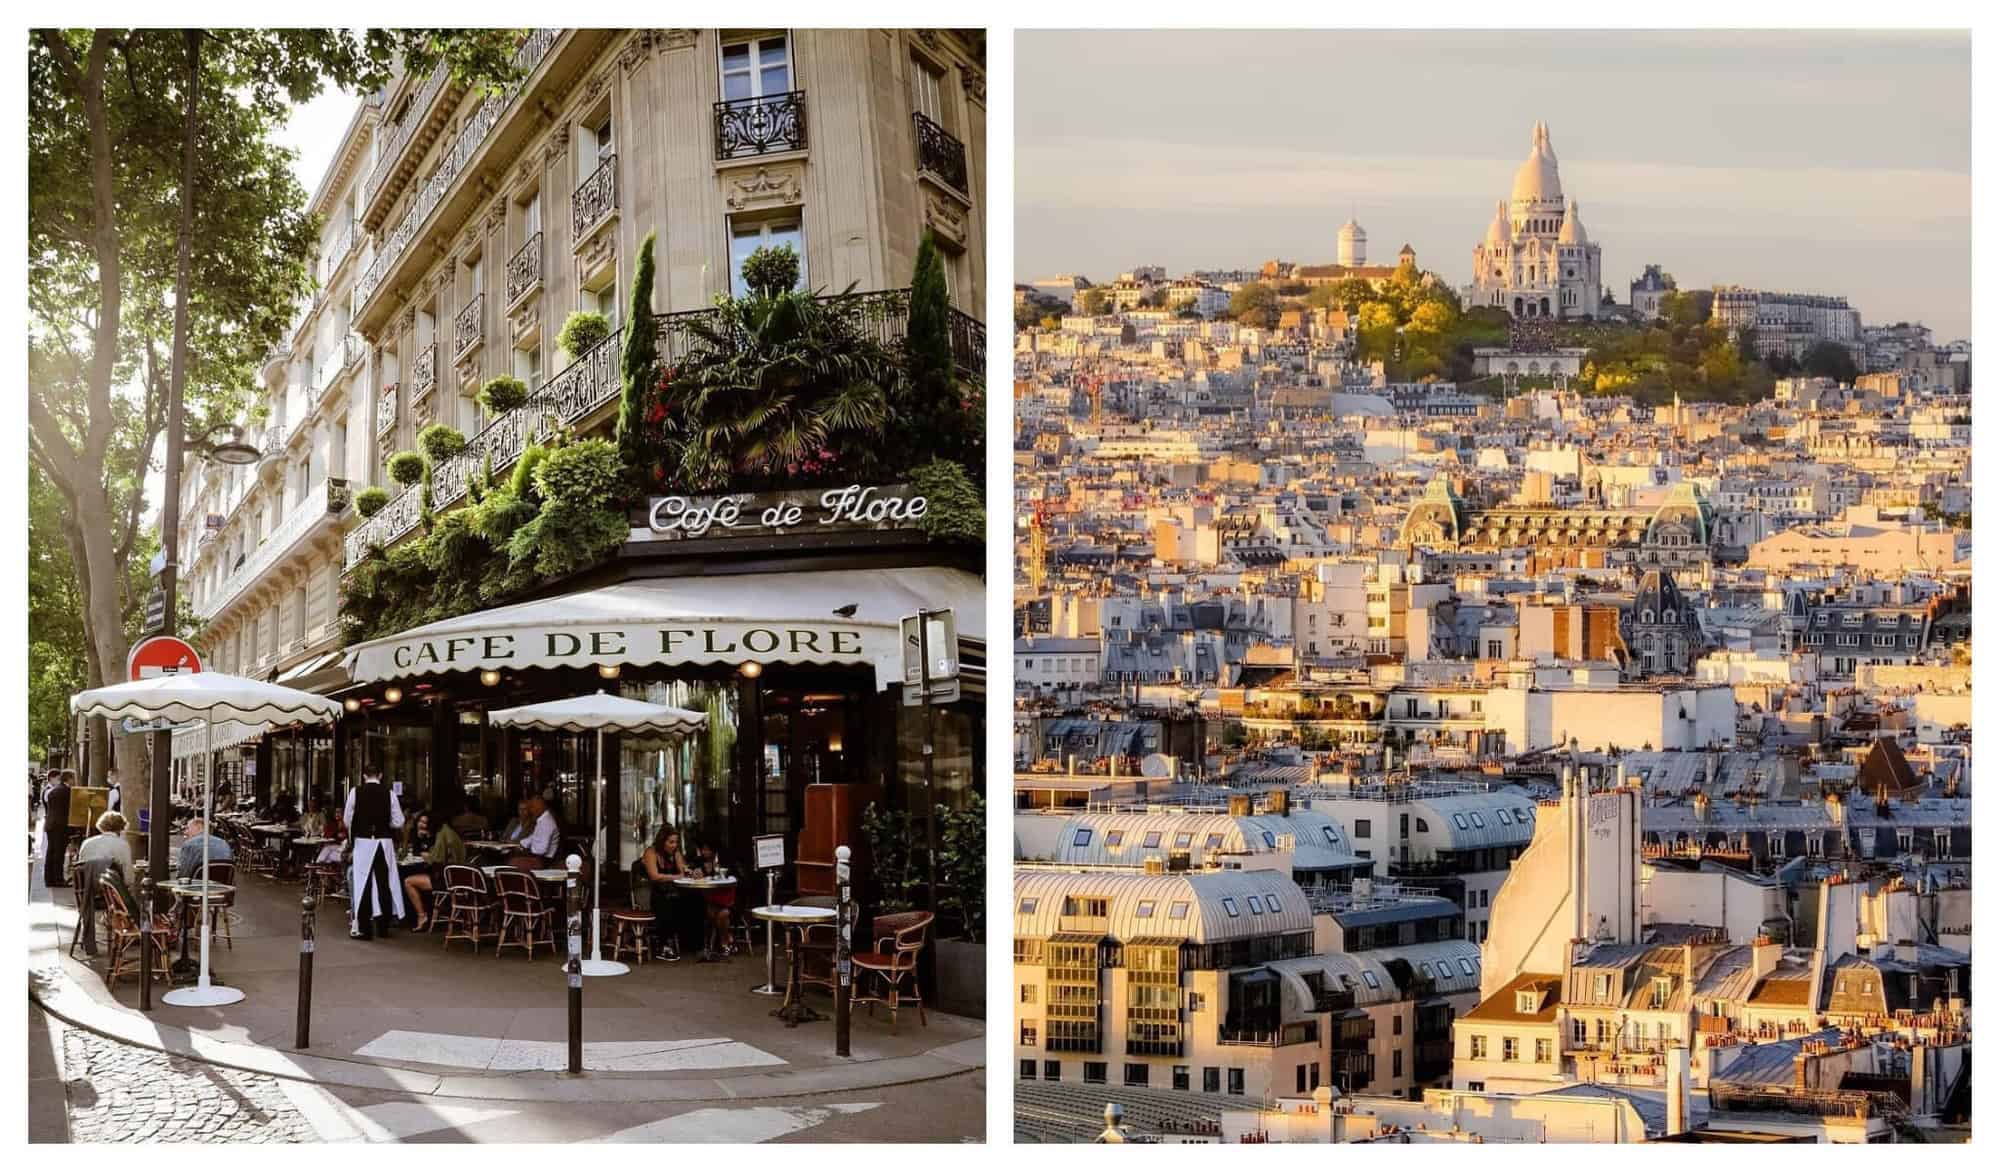 Left: Cafe de Flore is pictured with several tables and chairs sat outside. Right: The Sacré Couer is pictured from afar, with Parisian buildings illuminated by the sun pictured before it